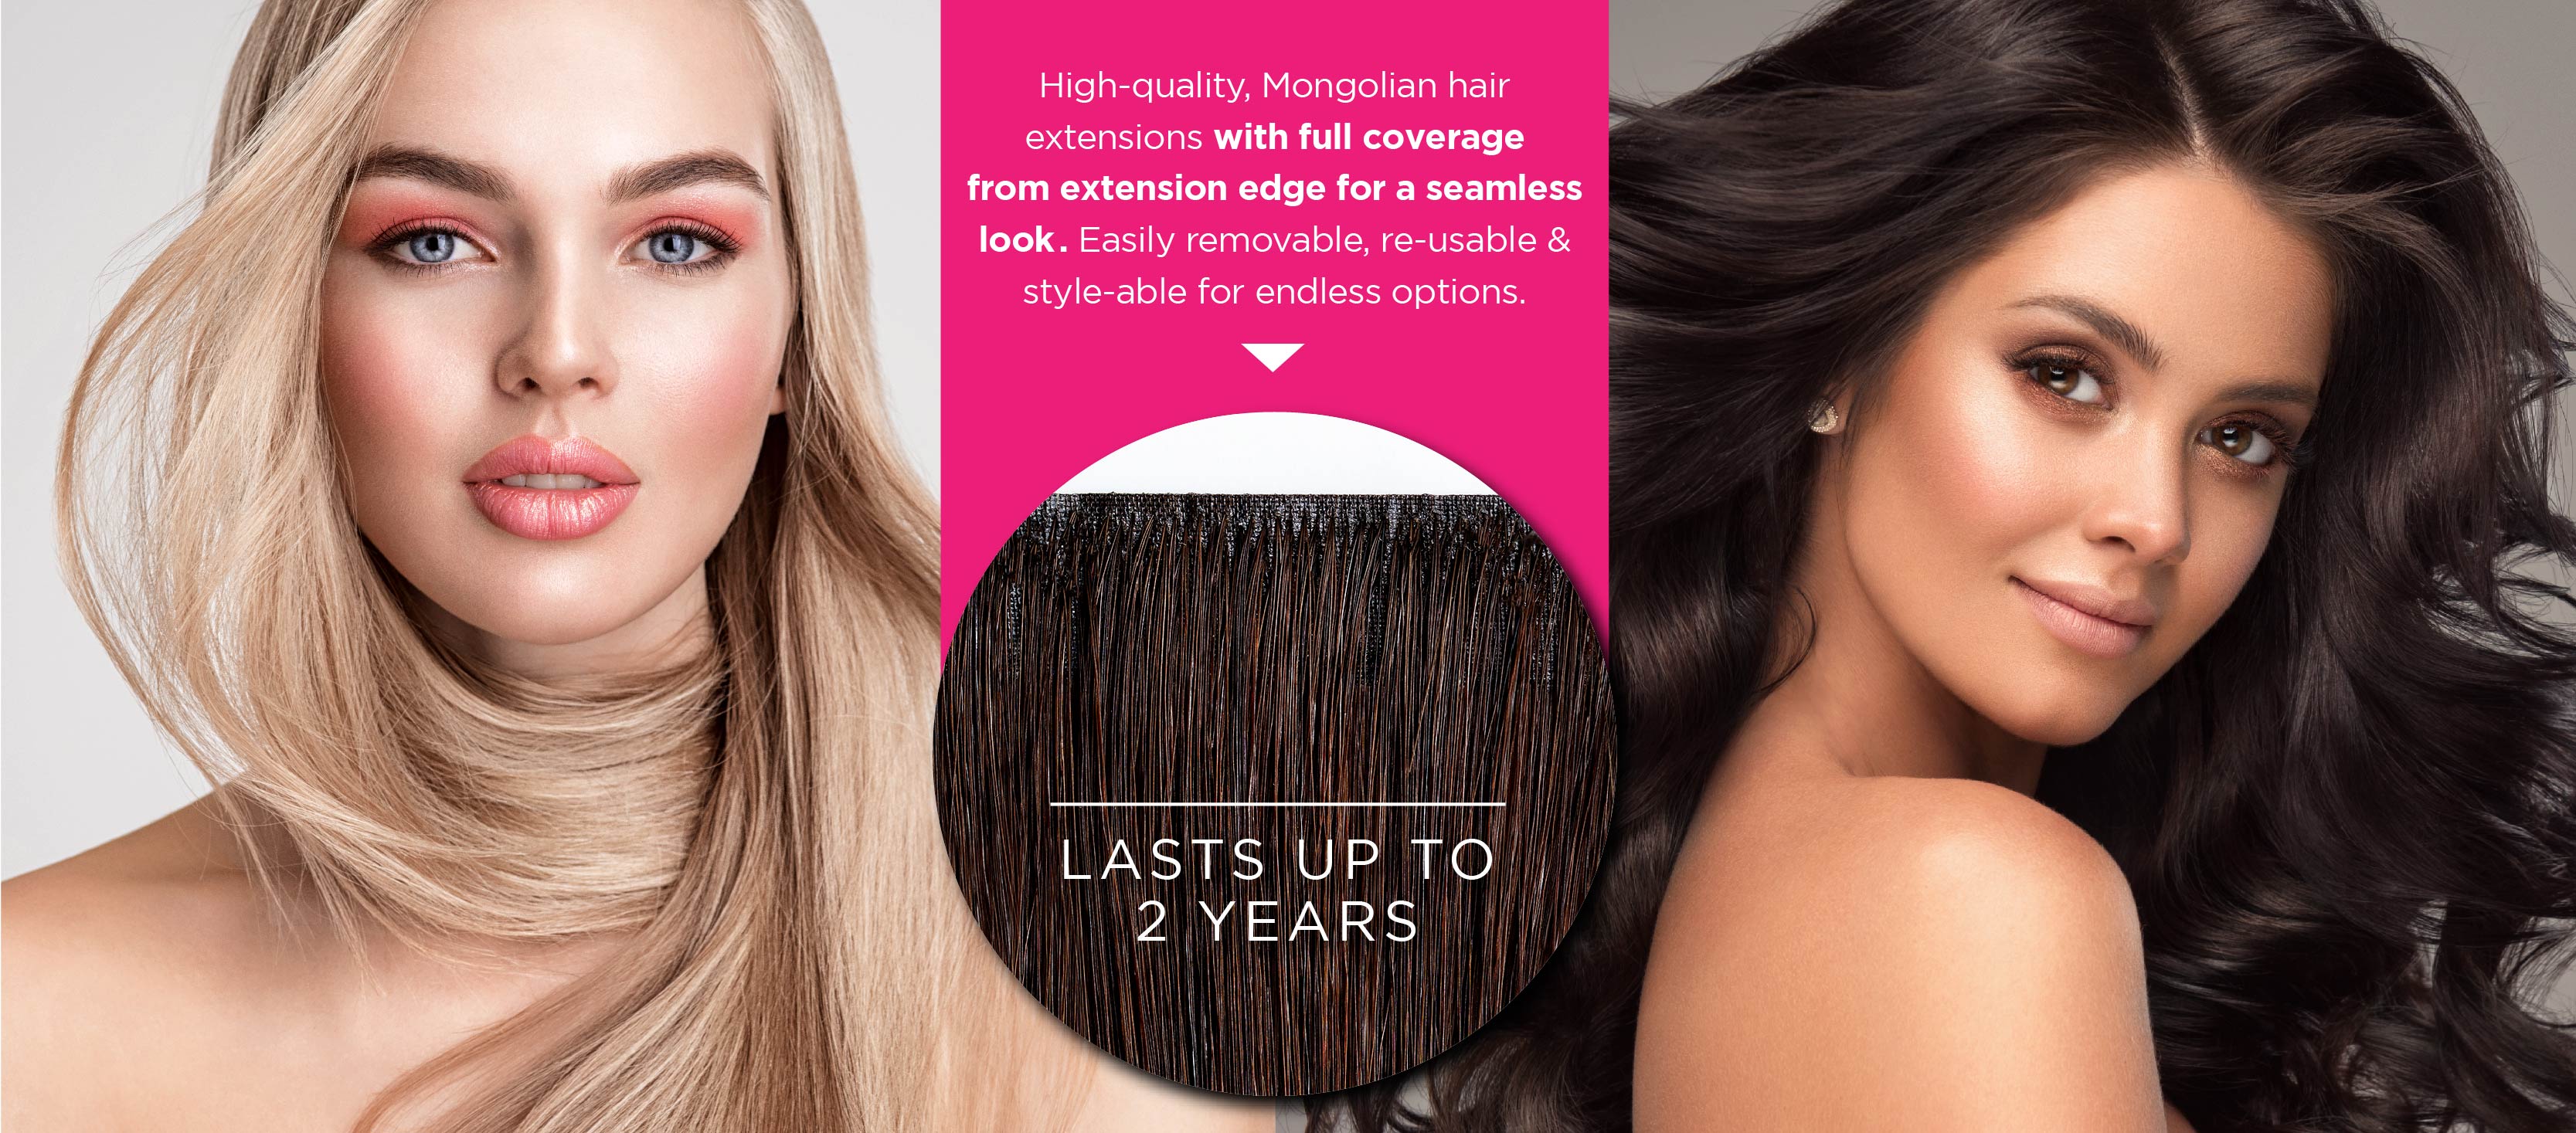 High-quality, Mongolian hair extensions with full coverage from extension edge for a seamless look.